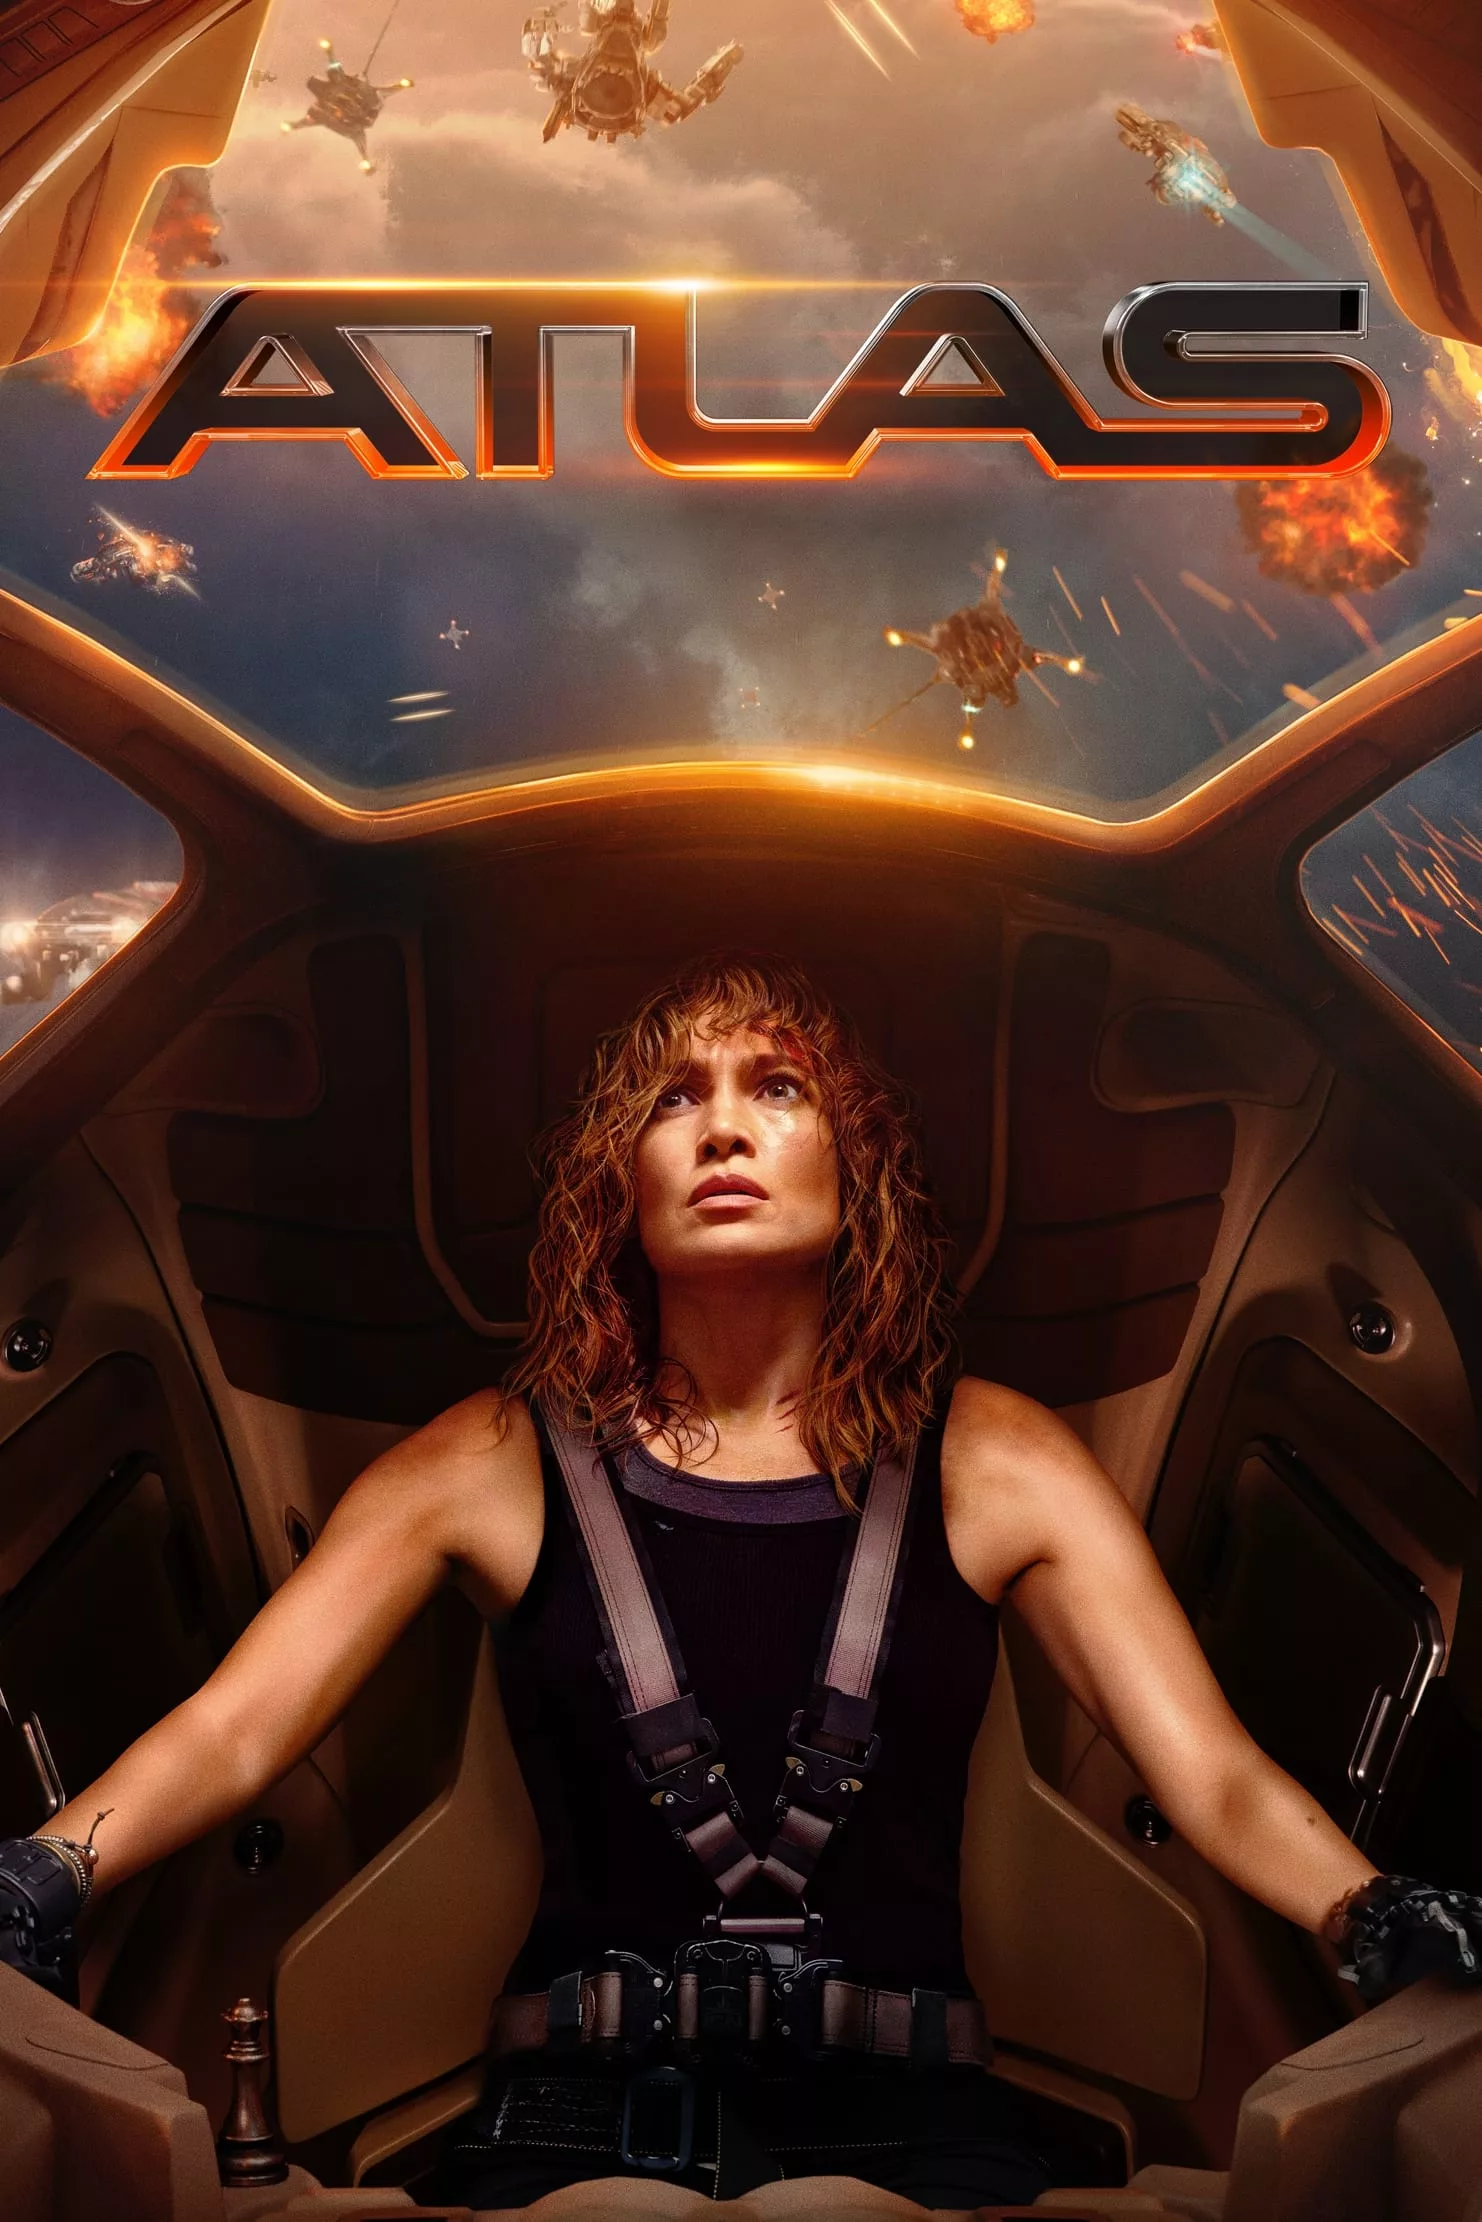 Poster for the movie "Atlas"